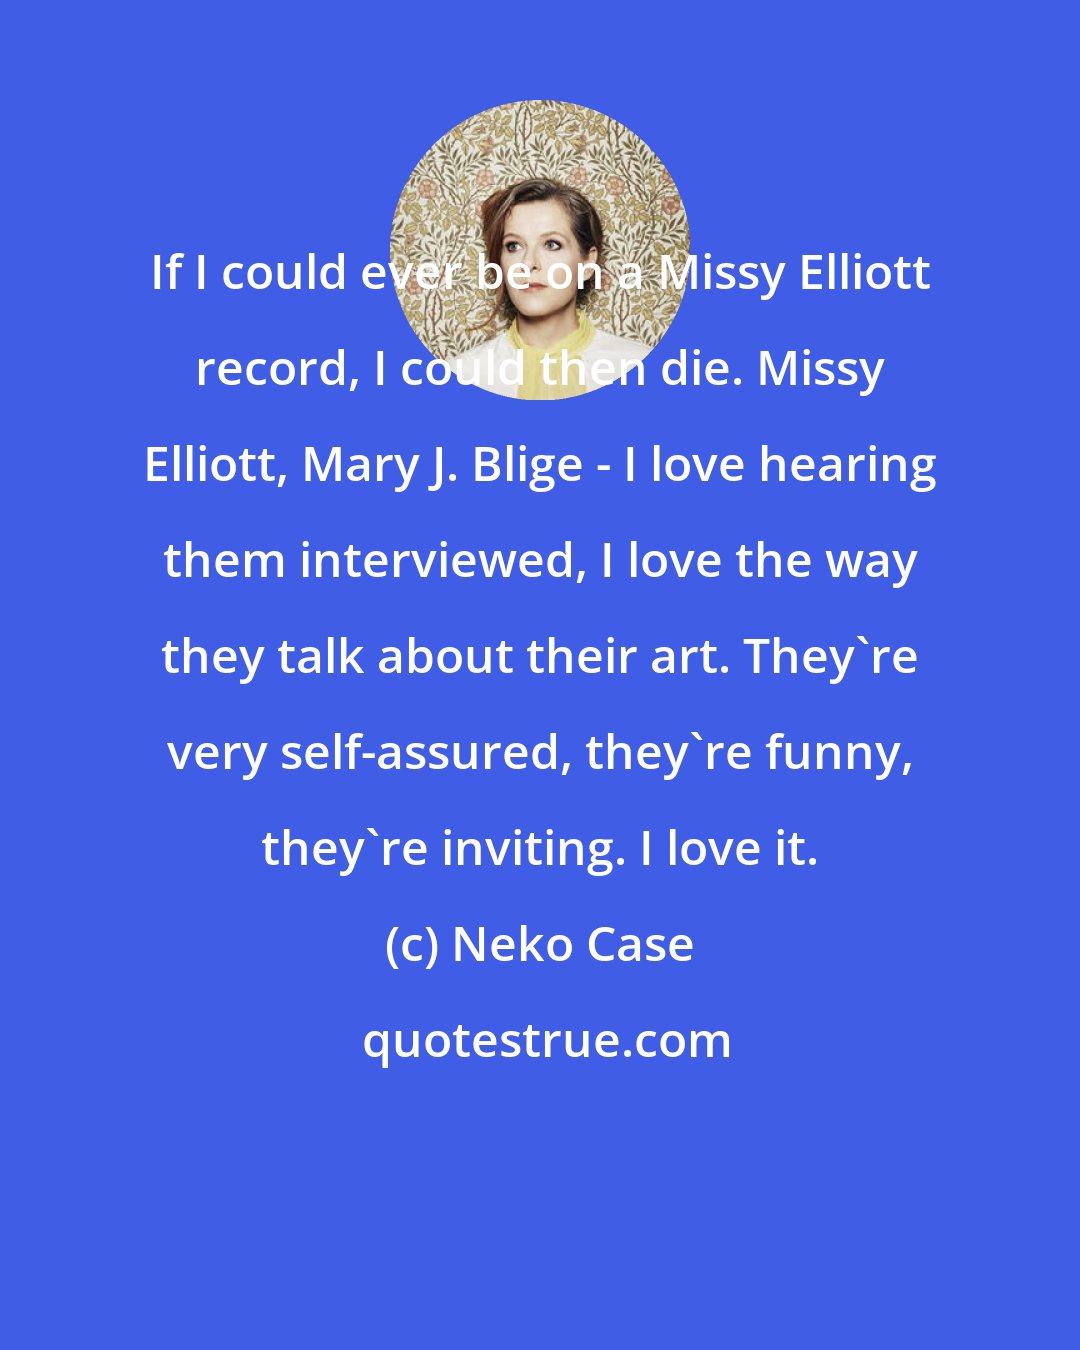 Neko Case: If I could ever be on a Missy Elliott record, I could then die. Missy Elliott, Mary J. Blige - I love hearing them interviewed, I love the way they talk about their art. They're very self-assured, they're funny, they're inviting. I love it.